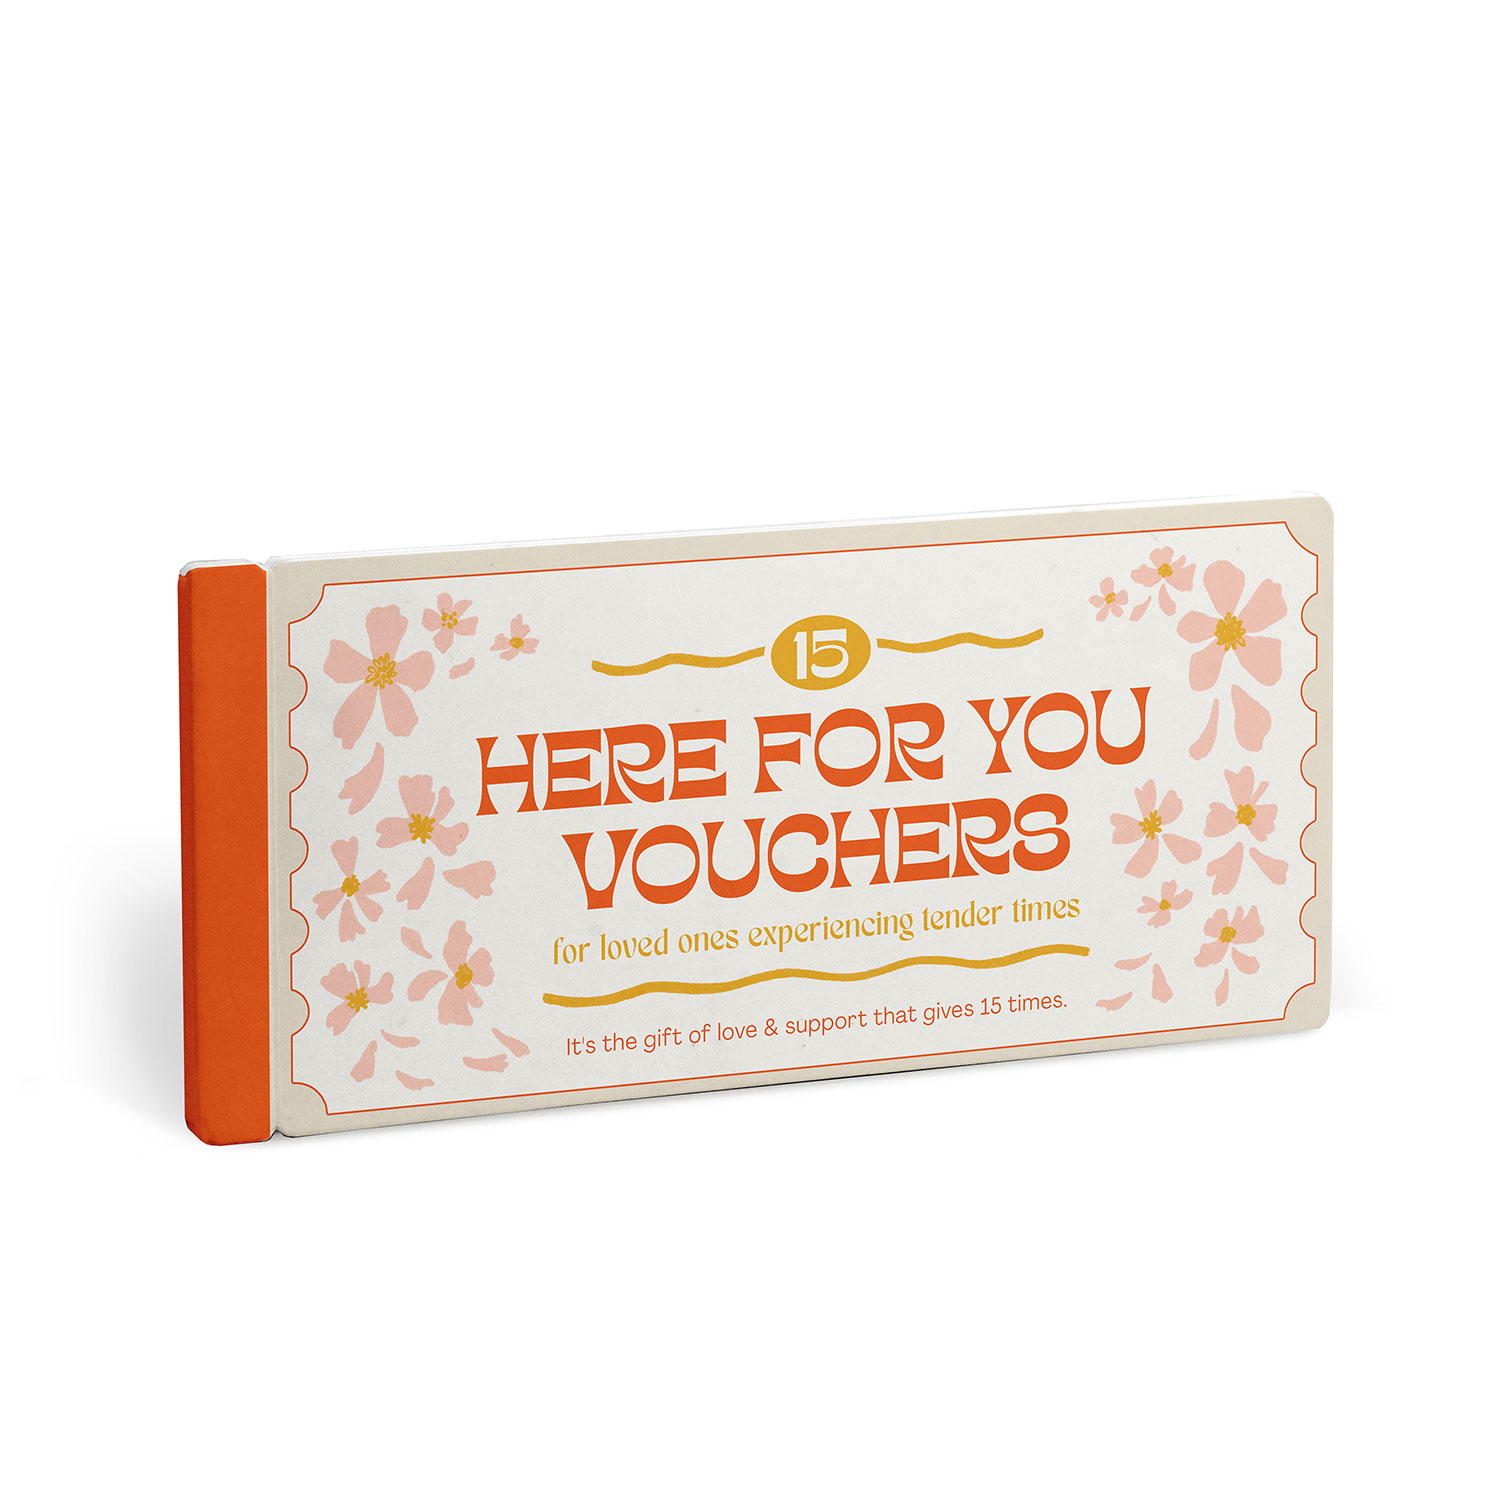 Here for You Vouchers